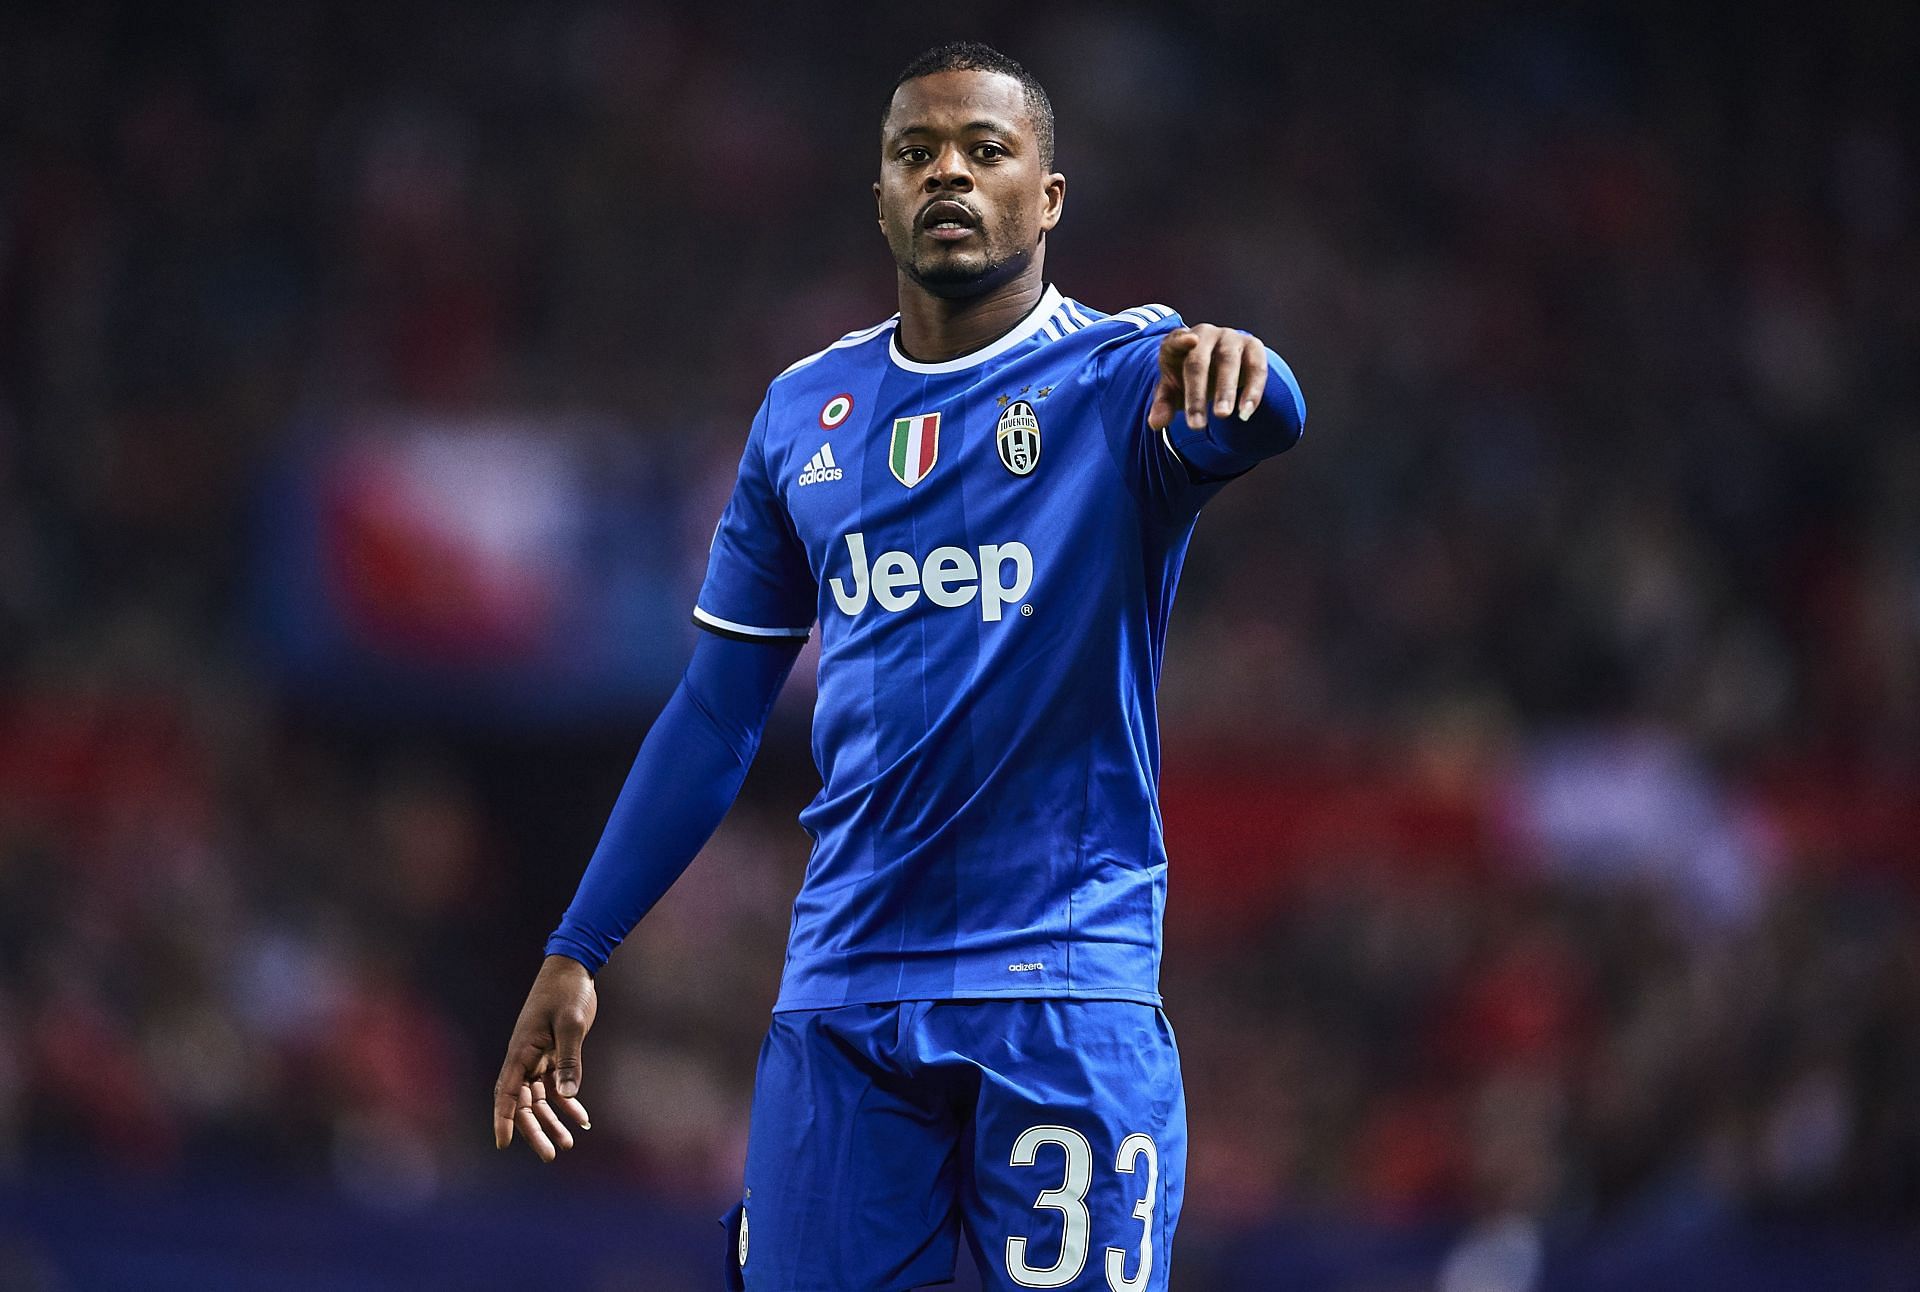 Patrice Evra (pictured) is set to make his boxing debut next month.